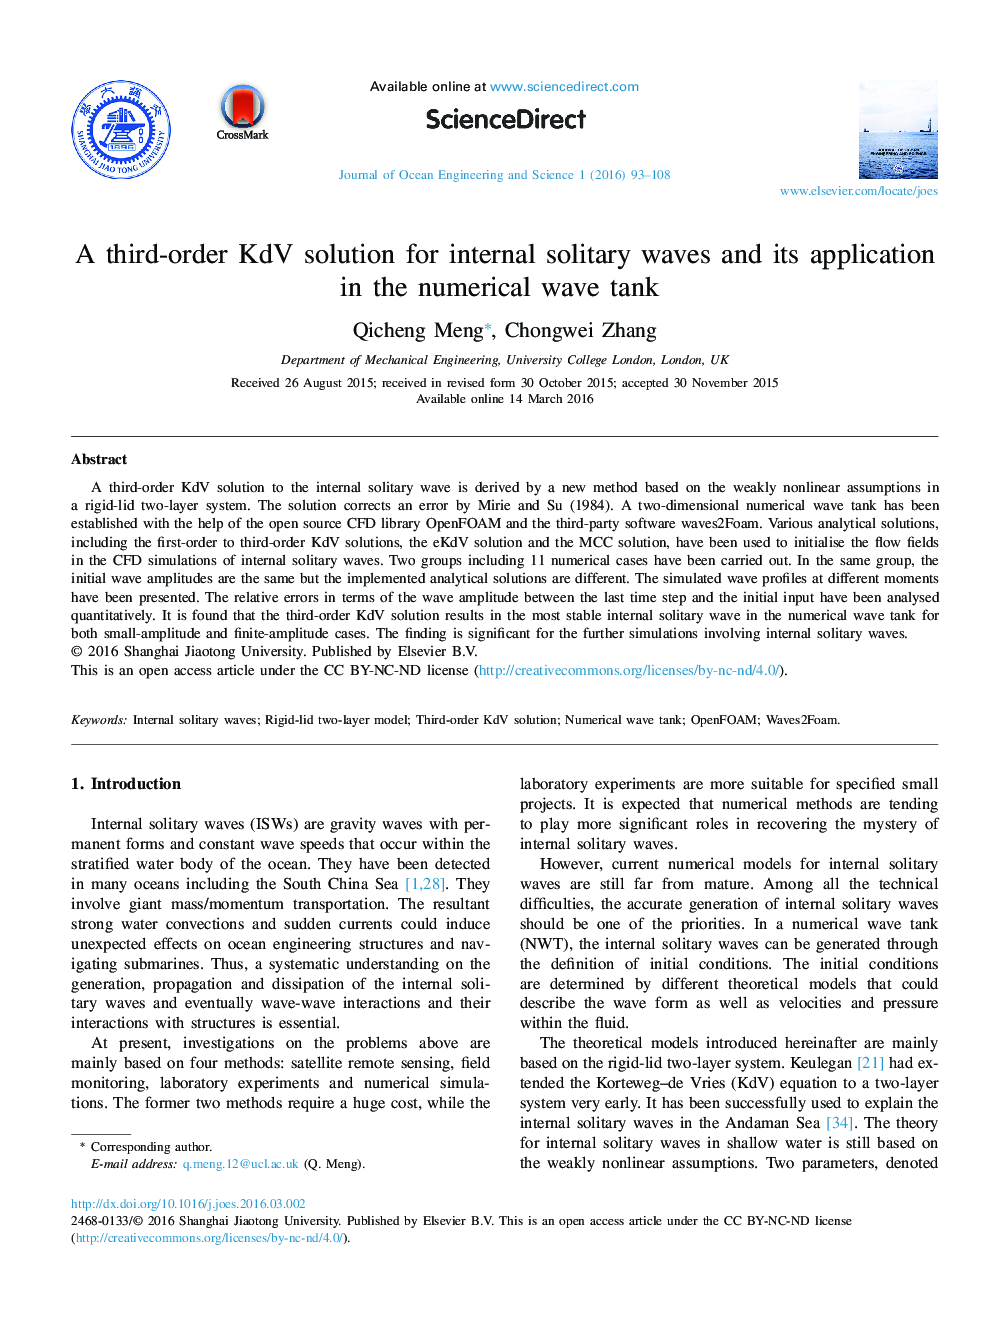 A third-order KdV solution for internal solitary waves and its application in the numerical wave tank
